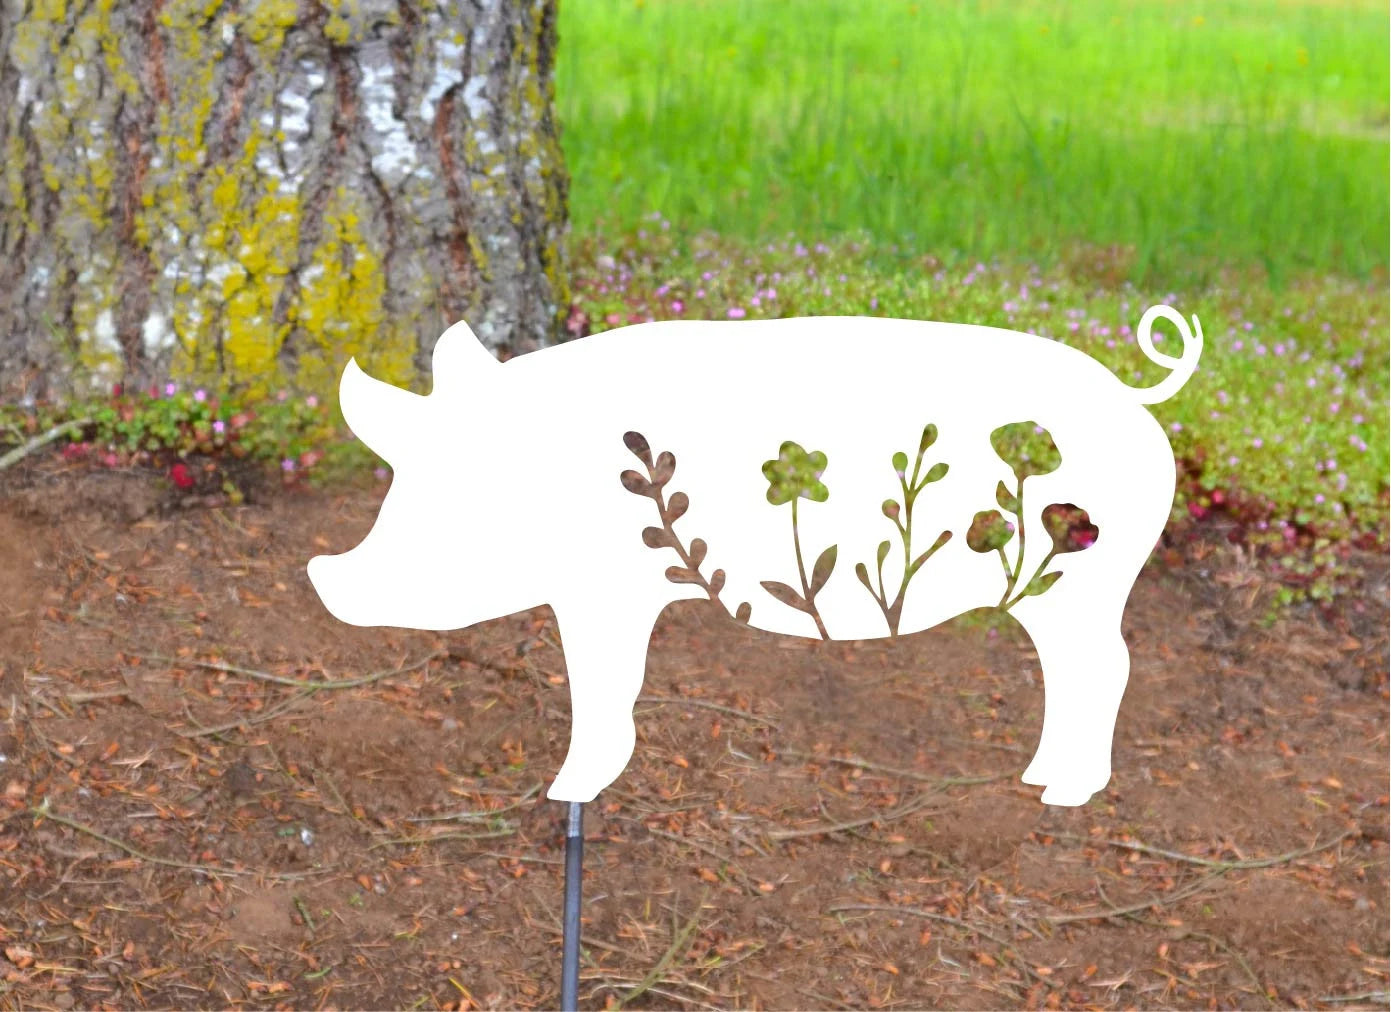 Metal Art Floral Garden pig stake Decoration, Garden, Spring Garden Decoration, Outdoor Garden Decor, 4H, 4 H, piggy, piglet, swine Stake Attached(12" Stake Detachable)